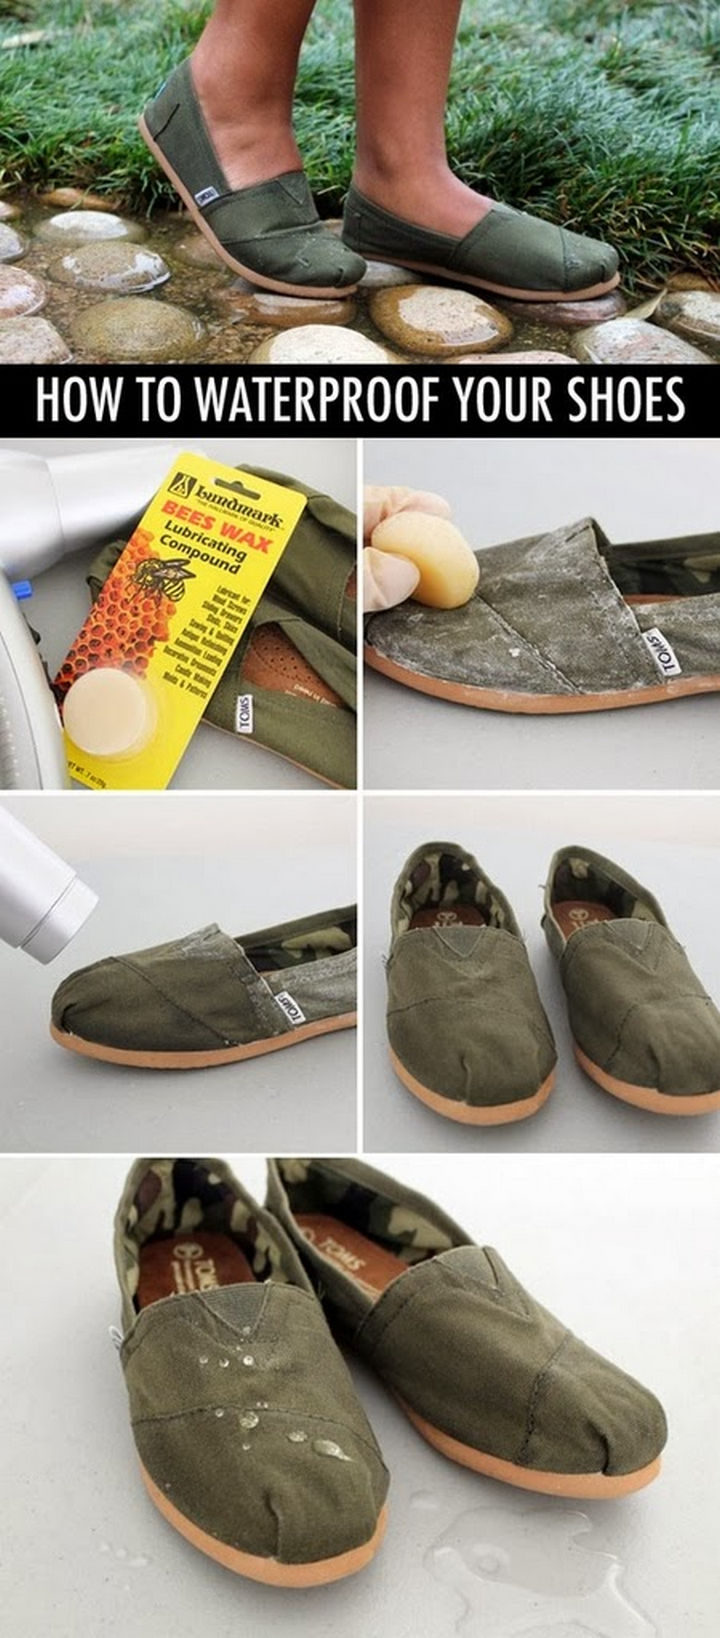 26 Simple Life Hacks - Waterproof canvas shoes with bees wax.